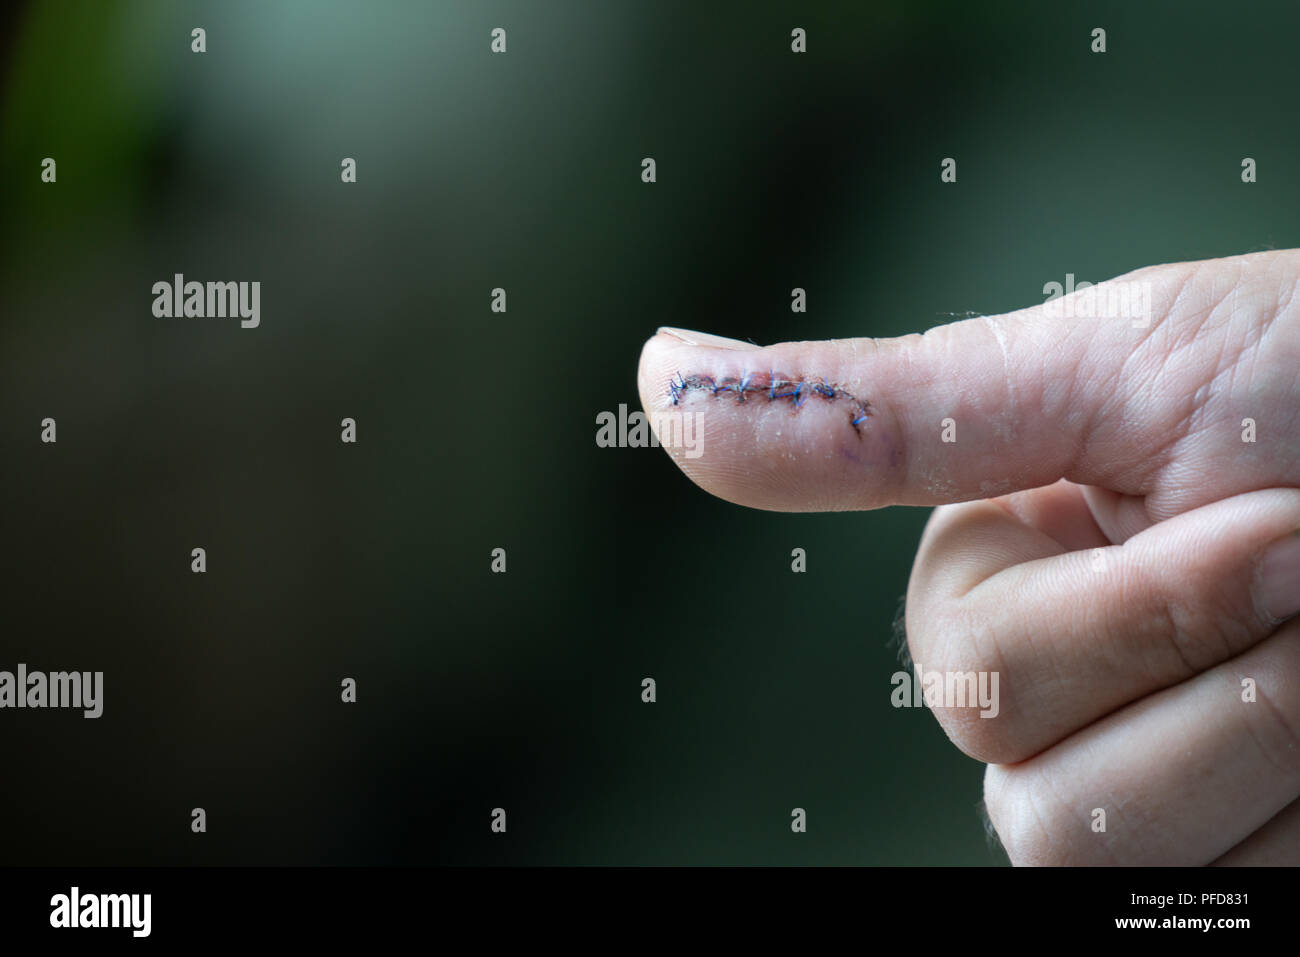 hand with stitches from surgery to repair damage Stock Photo